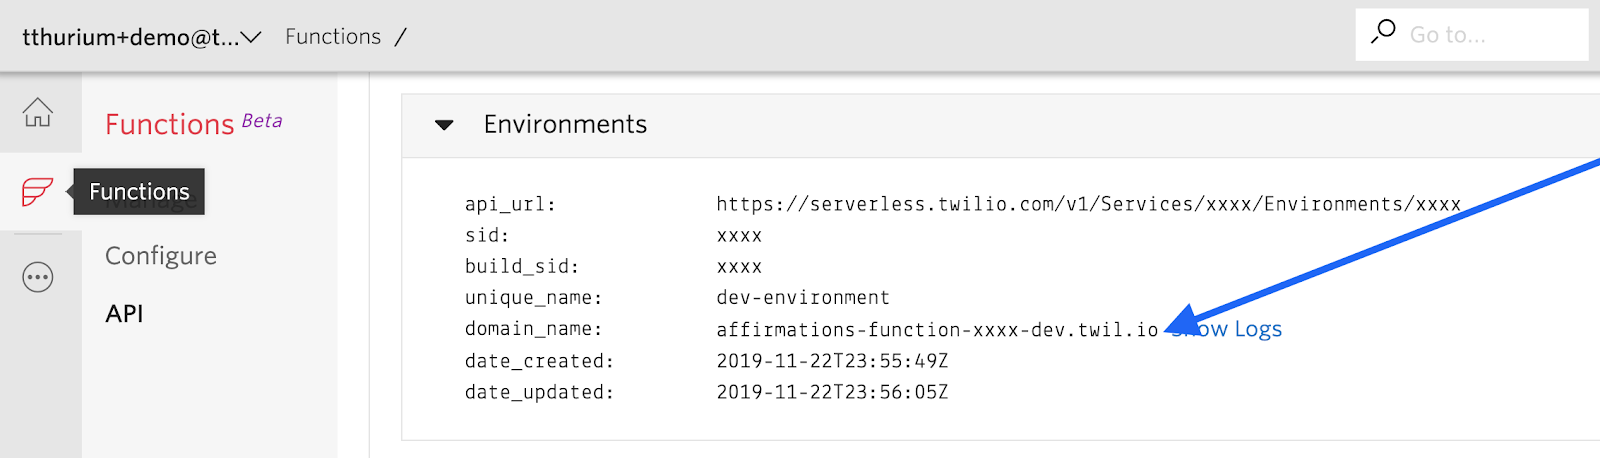 Screenshot of the Functions section of the Twilio console. Under the "Environments" header, an arrow points to a domain_name, which in this case is affirmations-function-xxxx-dev.twil.io.